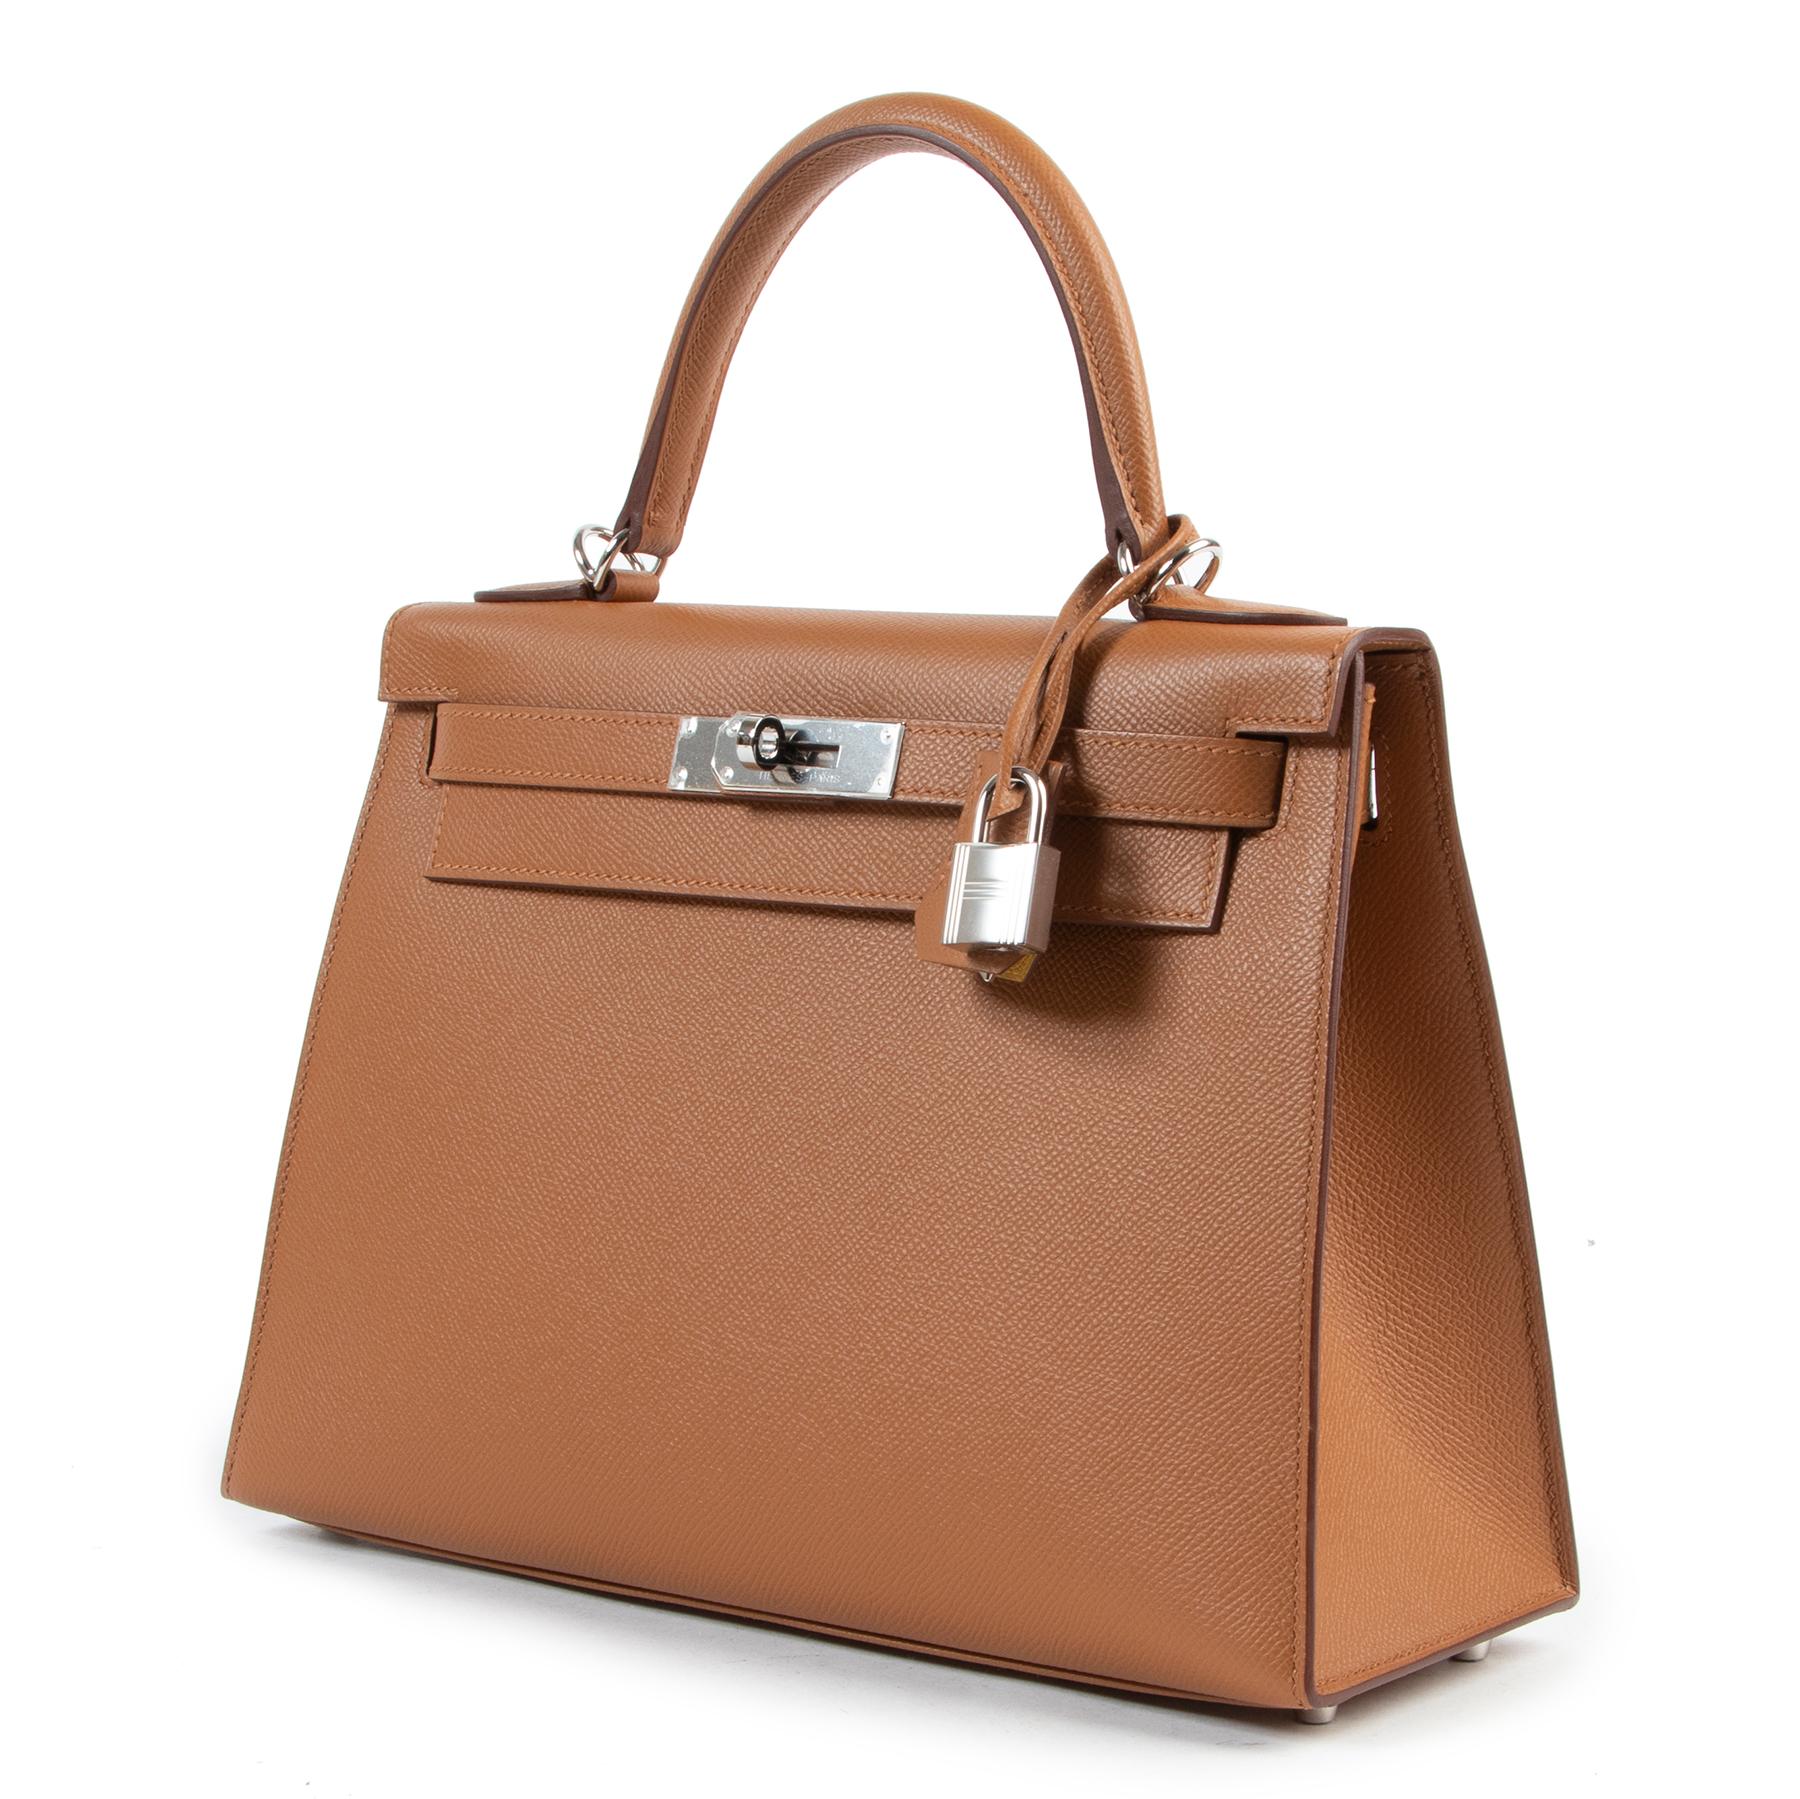 Hermes Gold / Jaune Ambre Kelly Sellier 28 PHW

Hurry hurry get your hands on this very hard to find Hermes Kelly 28. 
The Hermès Kelly bag an iconic and timeless bag named after the stunning film star Grace Kelly.

Crafted in Hermes most popular